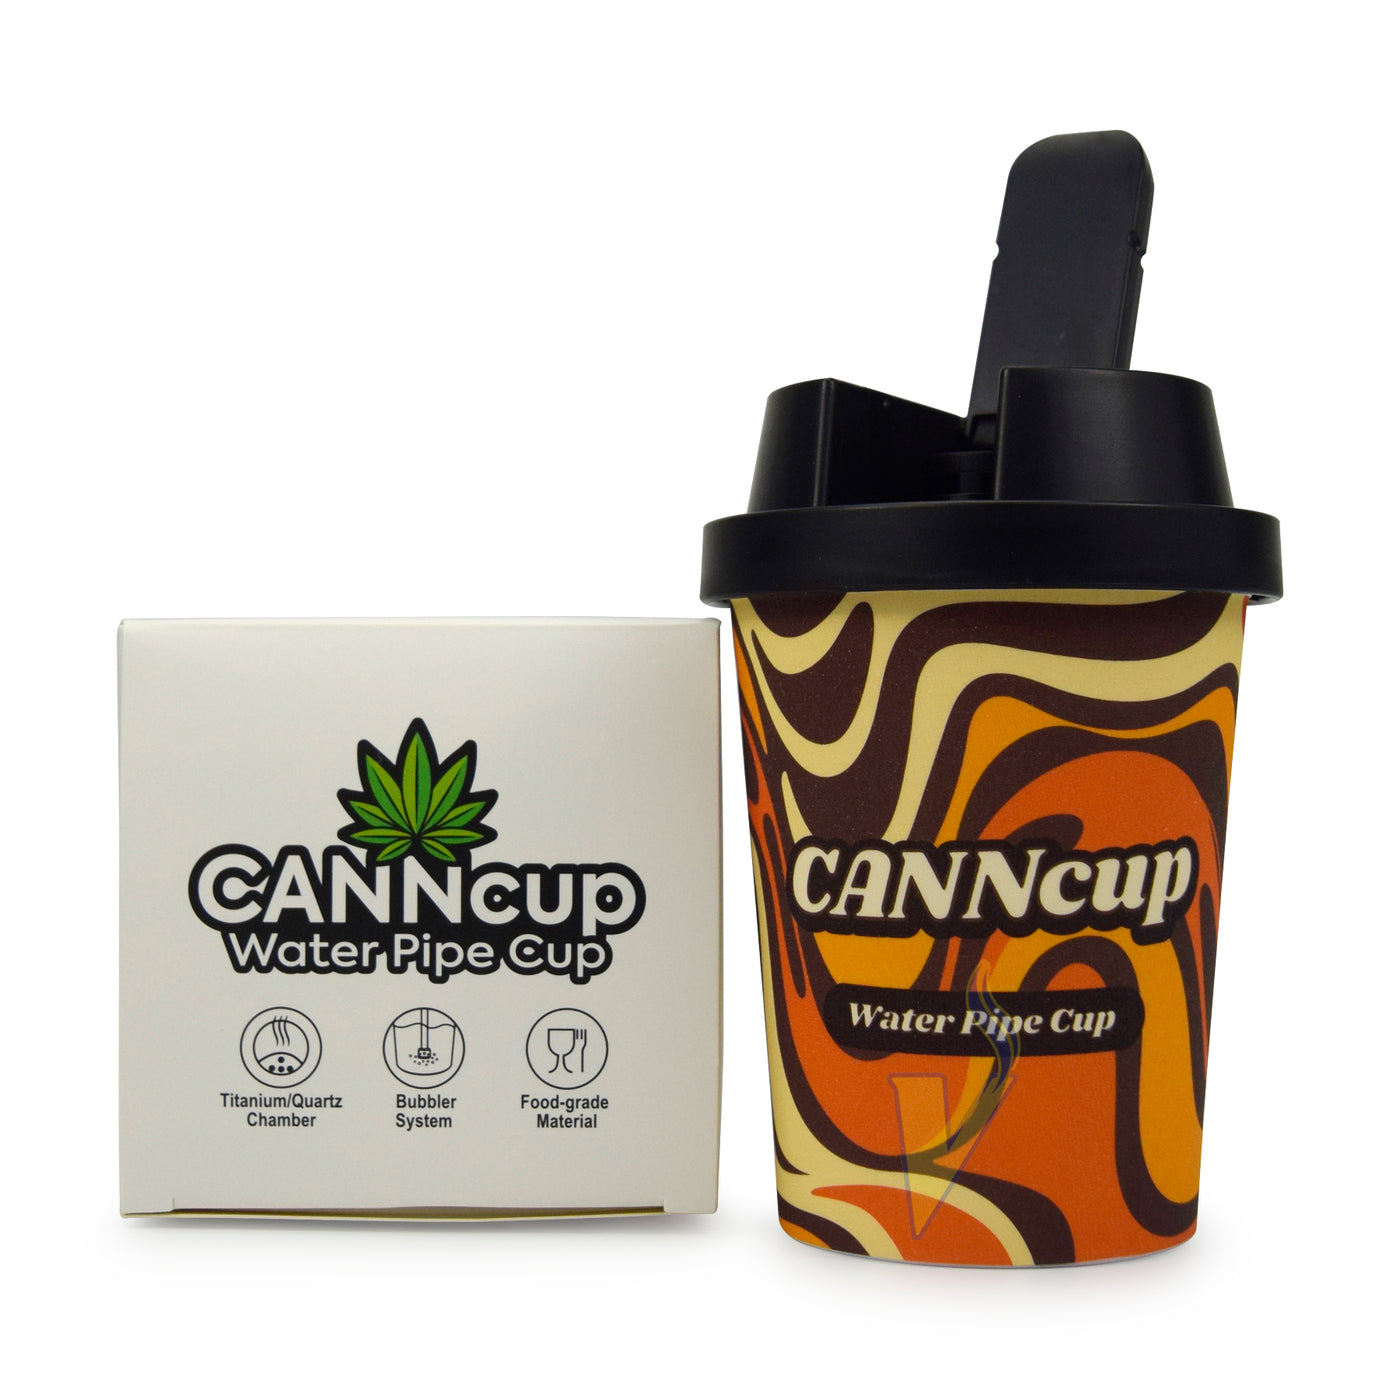 Cannacup Water Pipe Cup